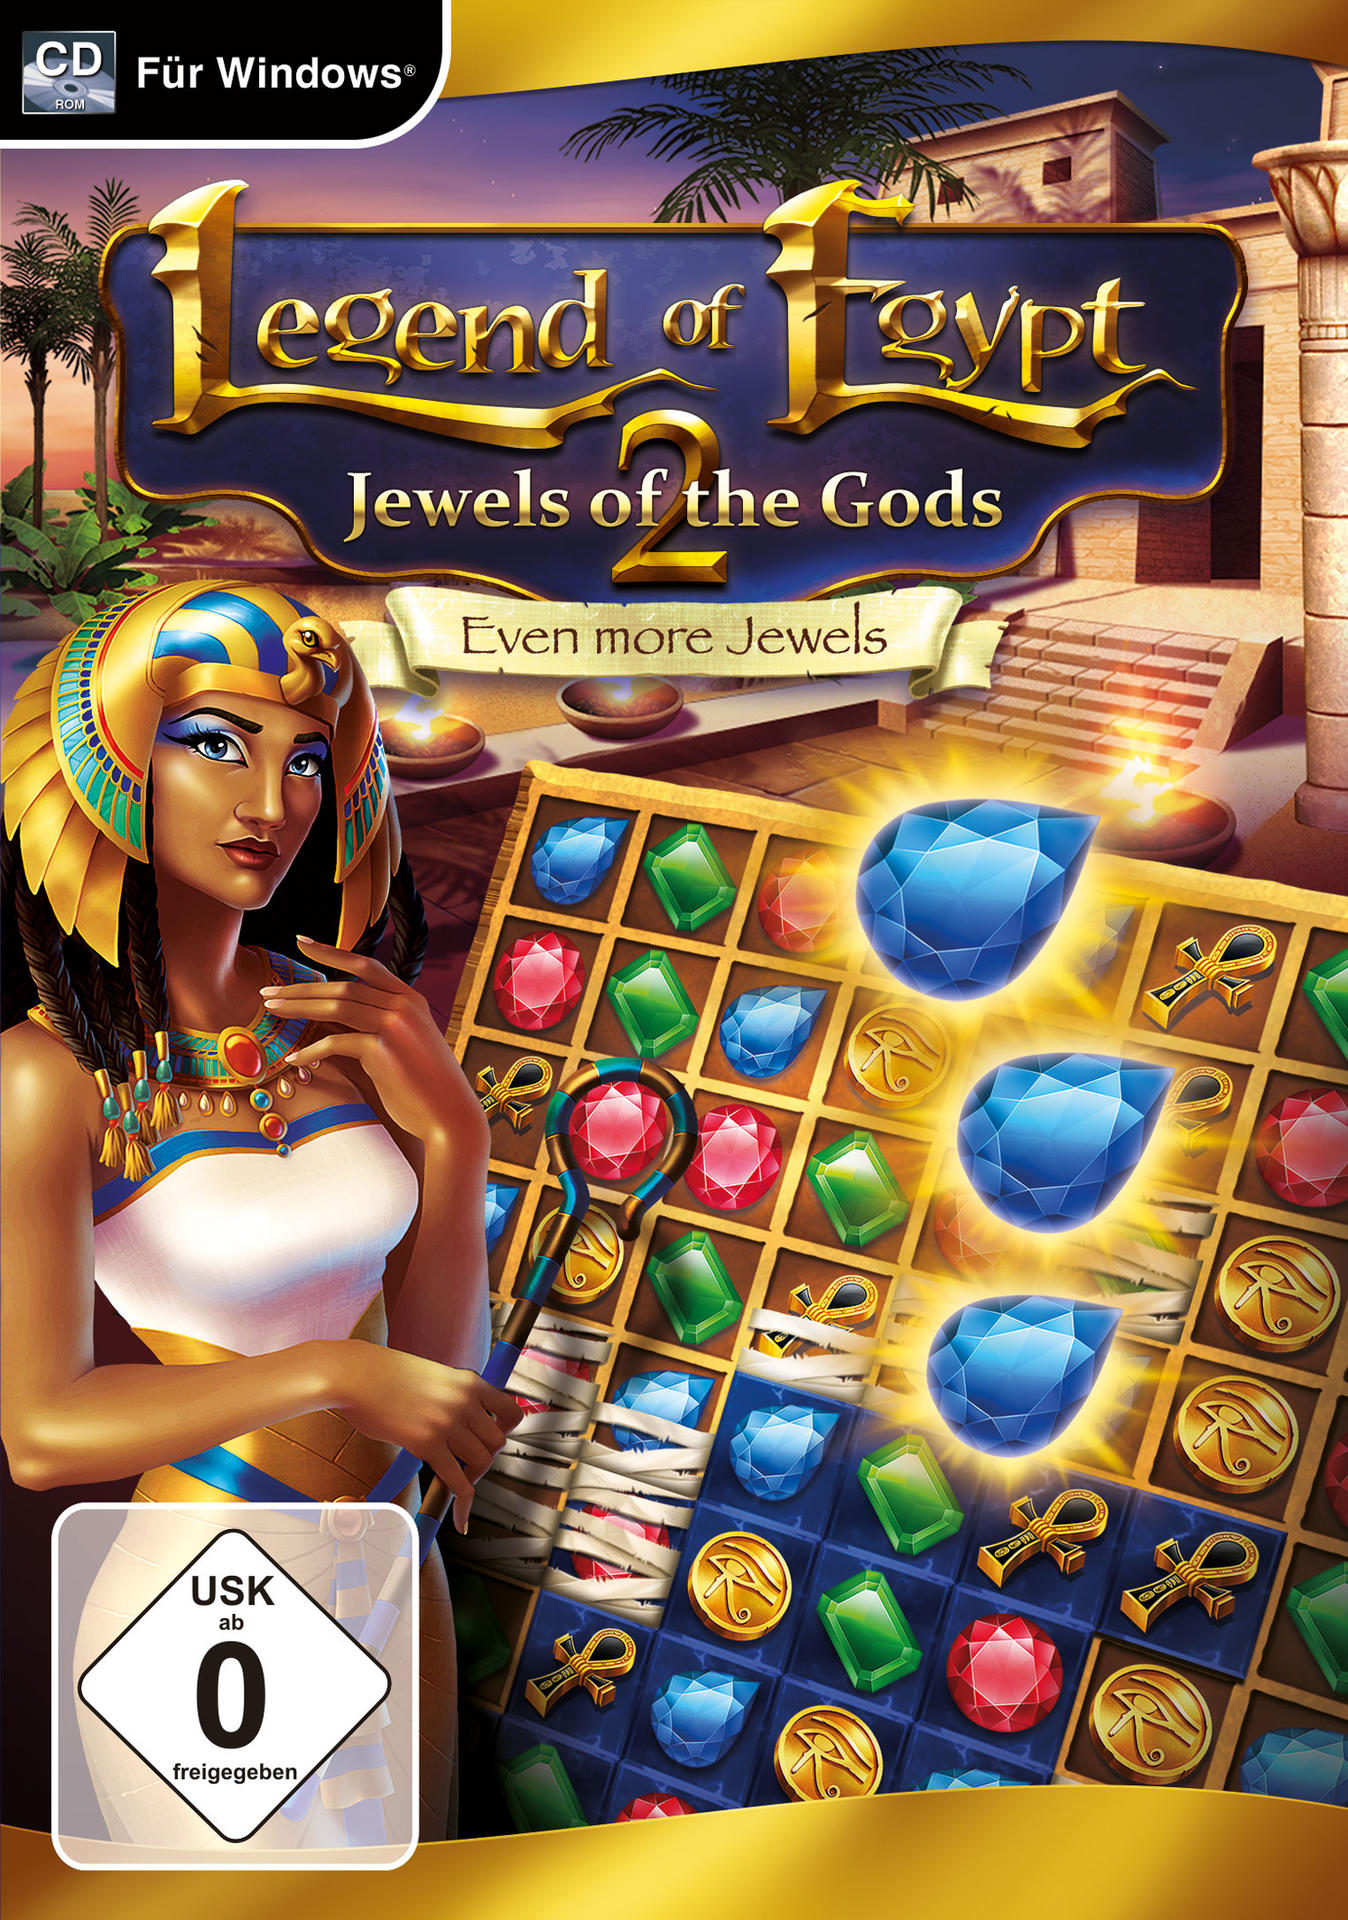 Legend of Egypt: Jewels Gods - more Jewels Even - [PC] 2 the of